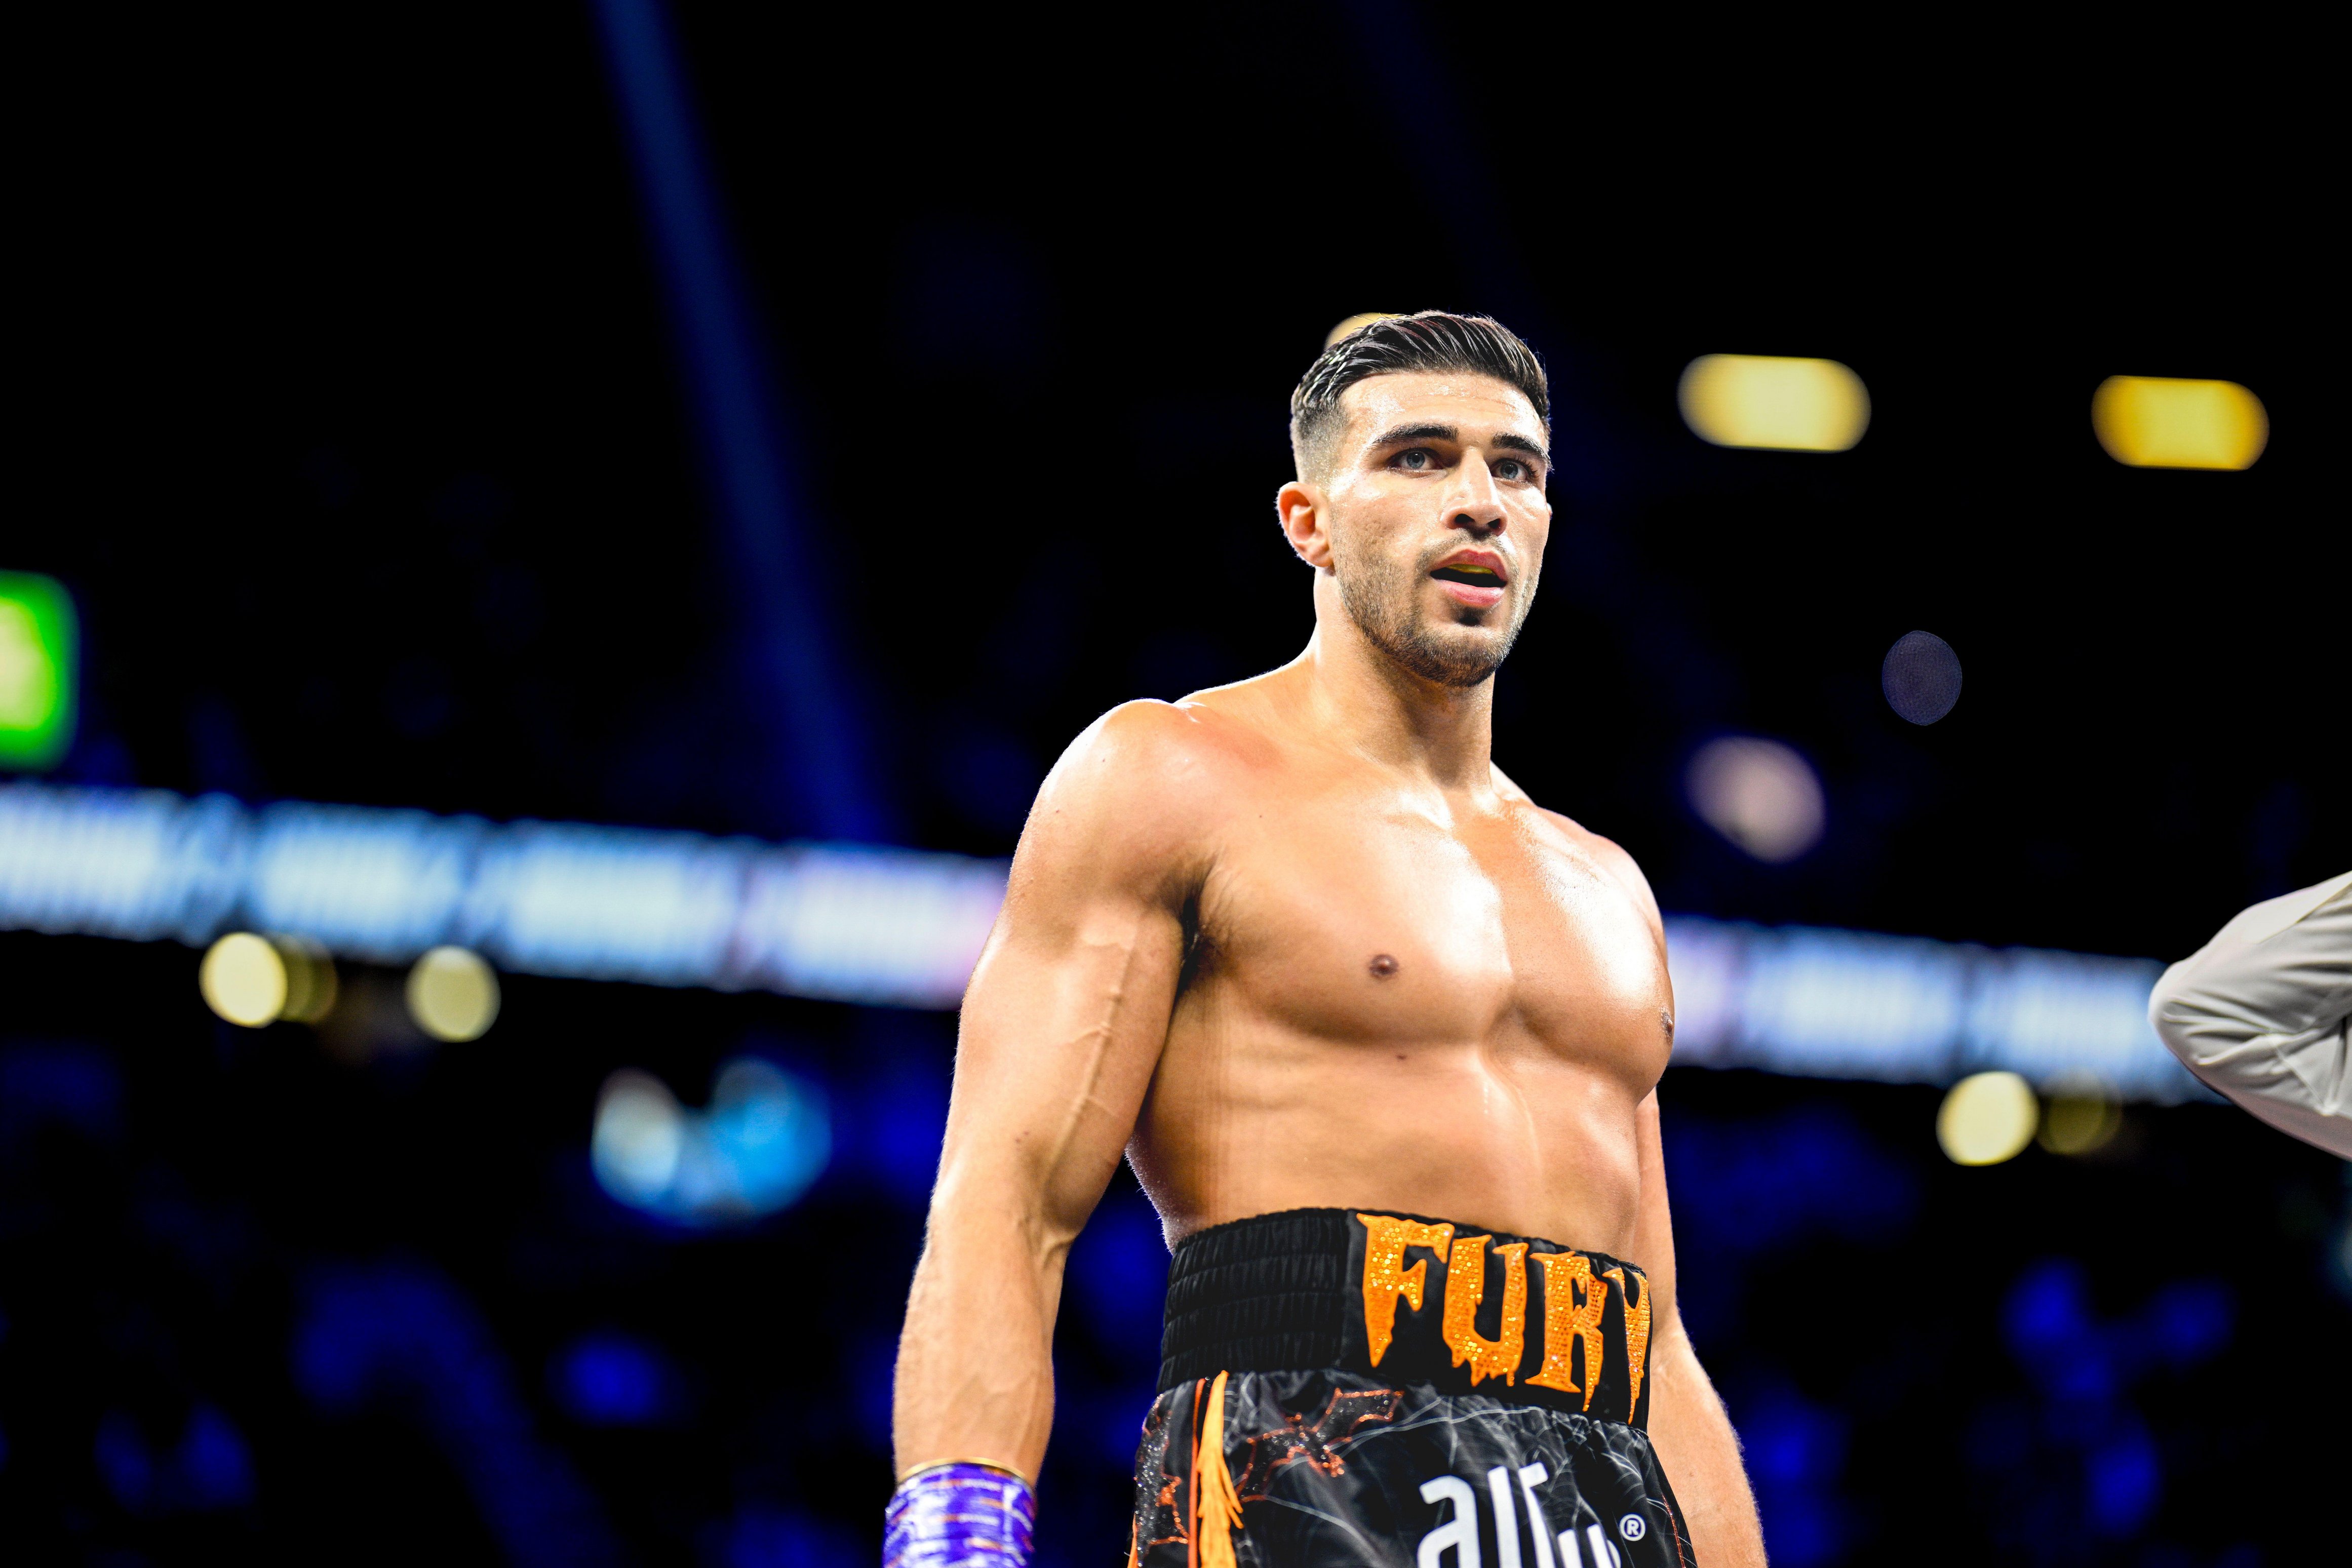 Tommy Fury has been called out to a rematch by Jake Paul